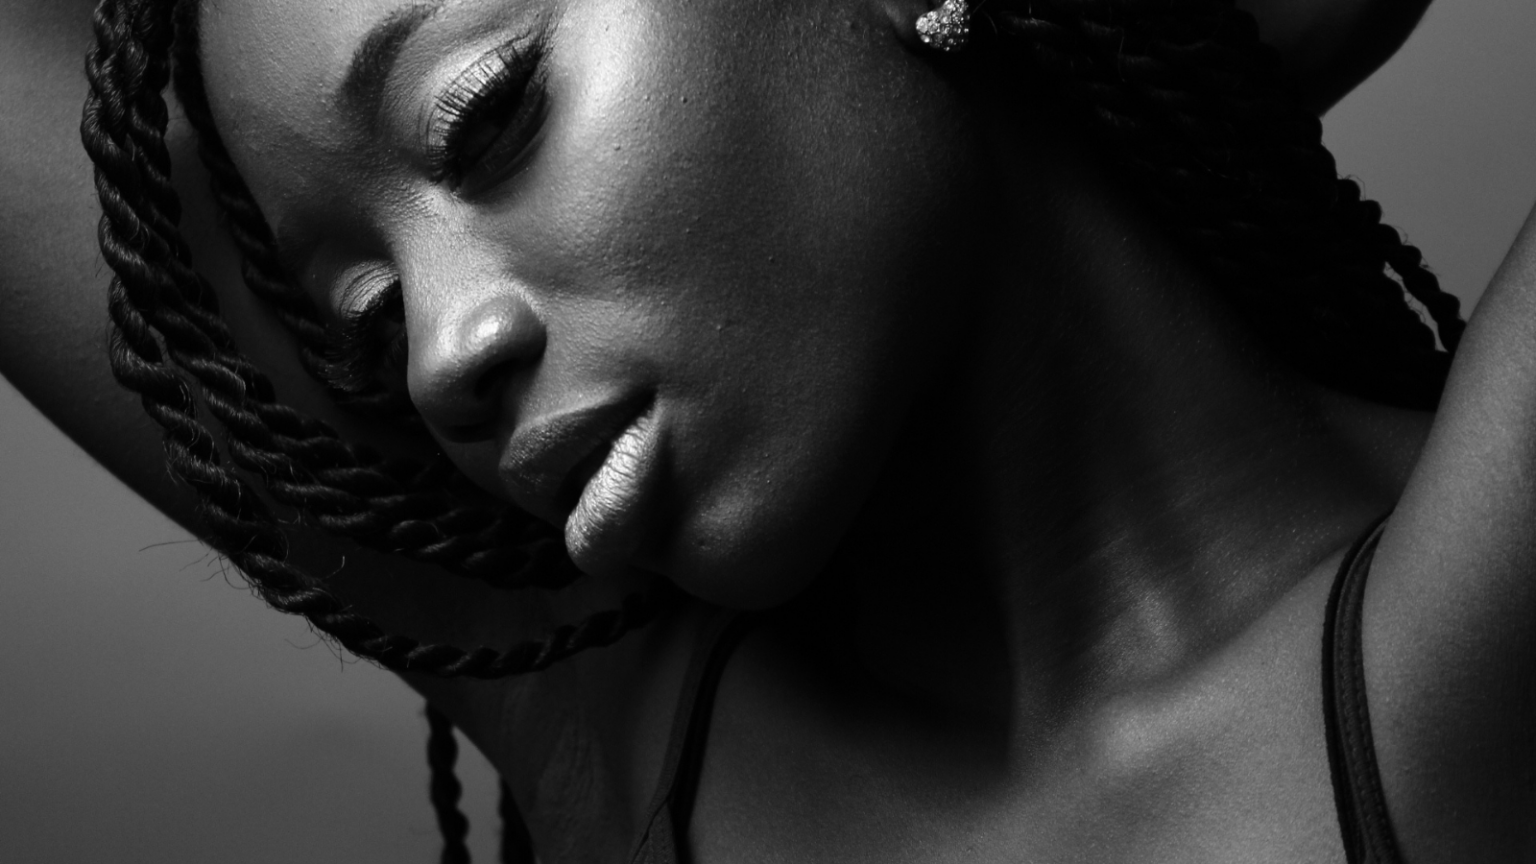 A closeup on the face of a feminine person with dark brown skin with a soft facial expression